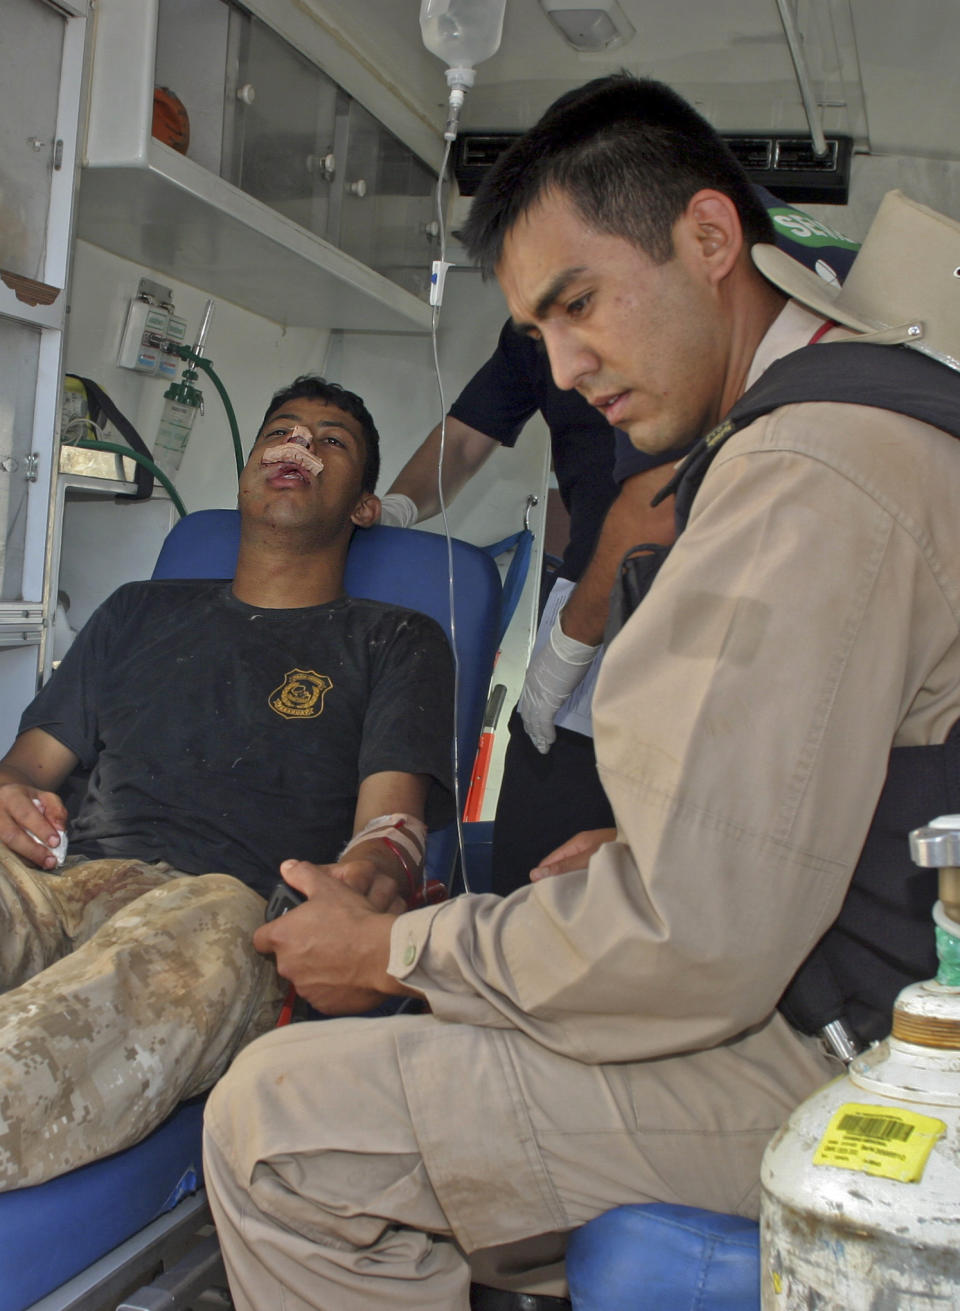 A police officer wounded in a land dispute is transferred via ambulance to a hospital after arriving at the airport in Asuncion, Paraguay, from Curuguaty, Friday, June 15, 2012. Paraguay deployed its army on Friday to resolve the violent land dispute in Curuguaty, a remote northern forest reserve, where 17 people have been killed in gun battles between police and landless farmers when police were trying to evict about 150 farmers from the reserve, which is part of a huge estate owned by a Colorado Party politician opposed to leftist President Fernando Lugo. (AP Photo)